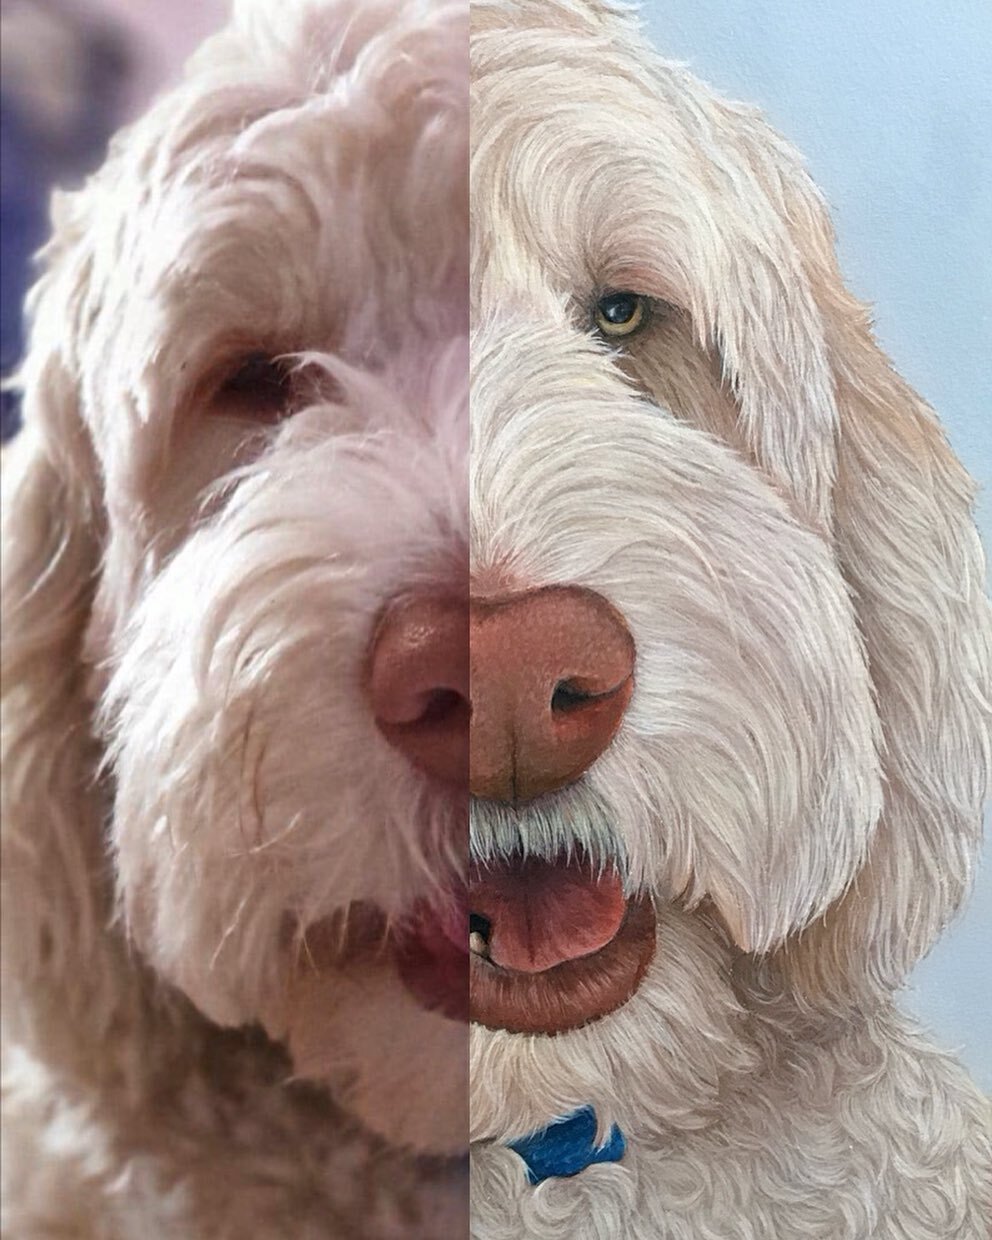 Side by side - &lsquo;Albus&rsquo; 

Worked with a few reference photos for this piece to bring out his eyes and get his fur colour accurate 🐶

Cant wait till May when I can share some new surprise commissions! Hope everyone is having a lovely week!